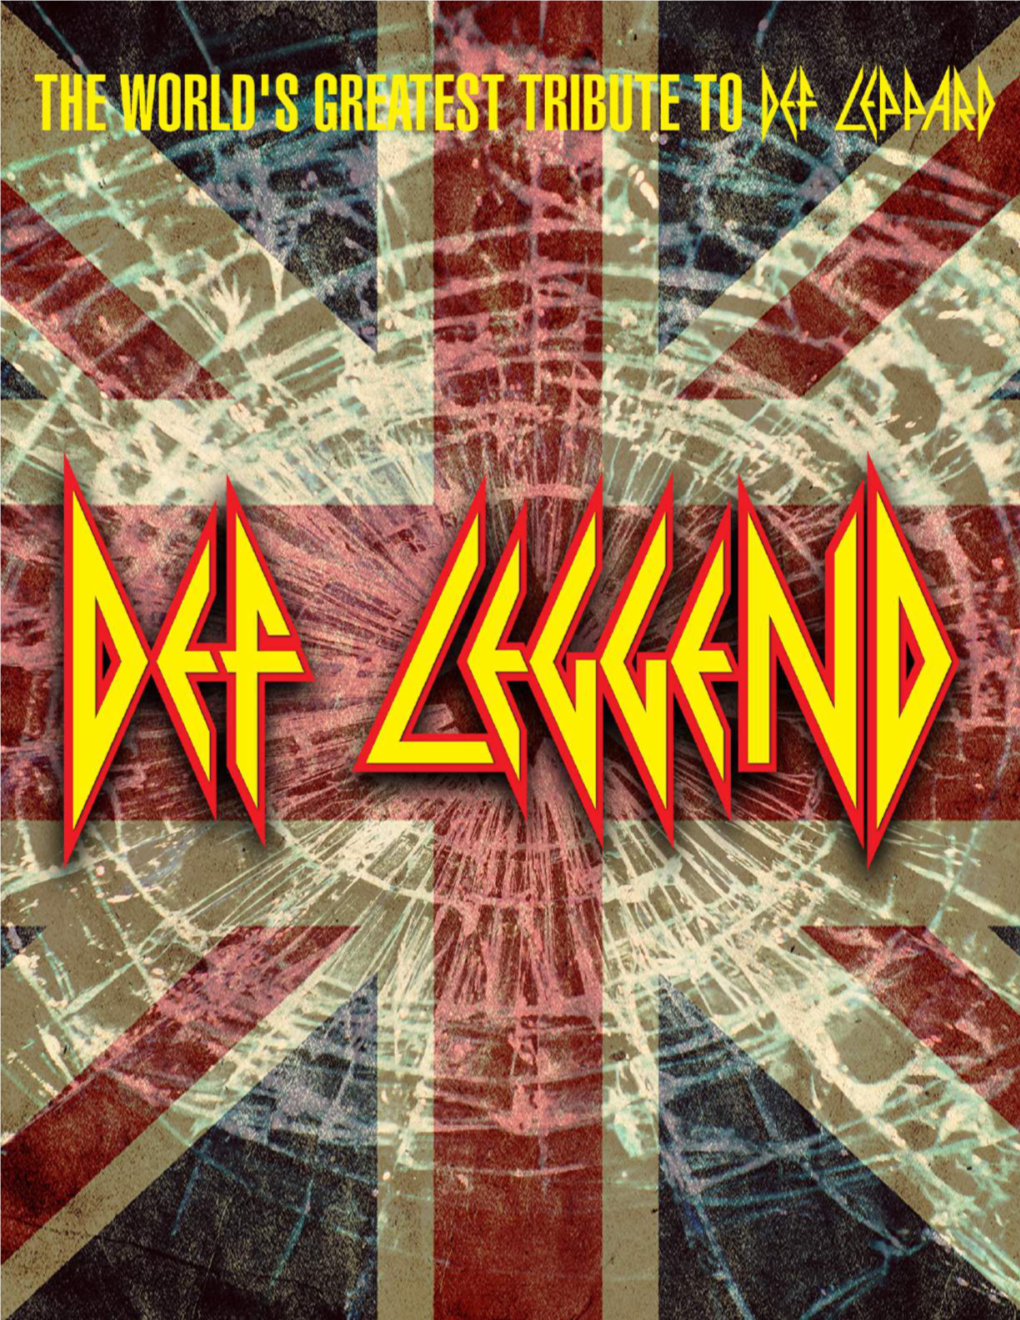 DEF LEGGEND Is the Most Authentic Def Leppard Tribute in the World